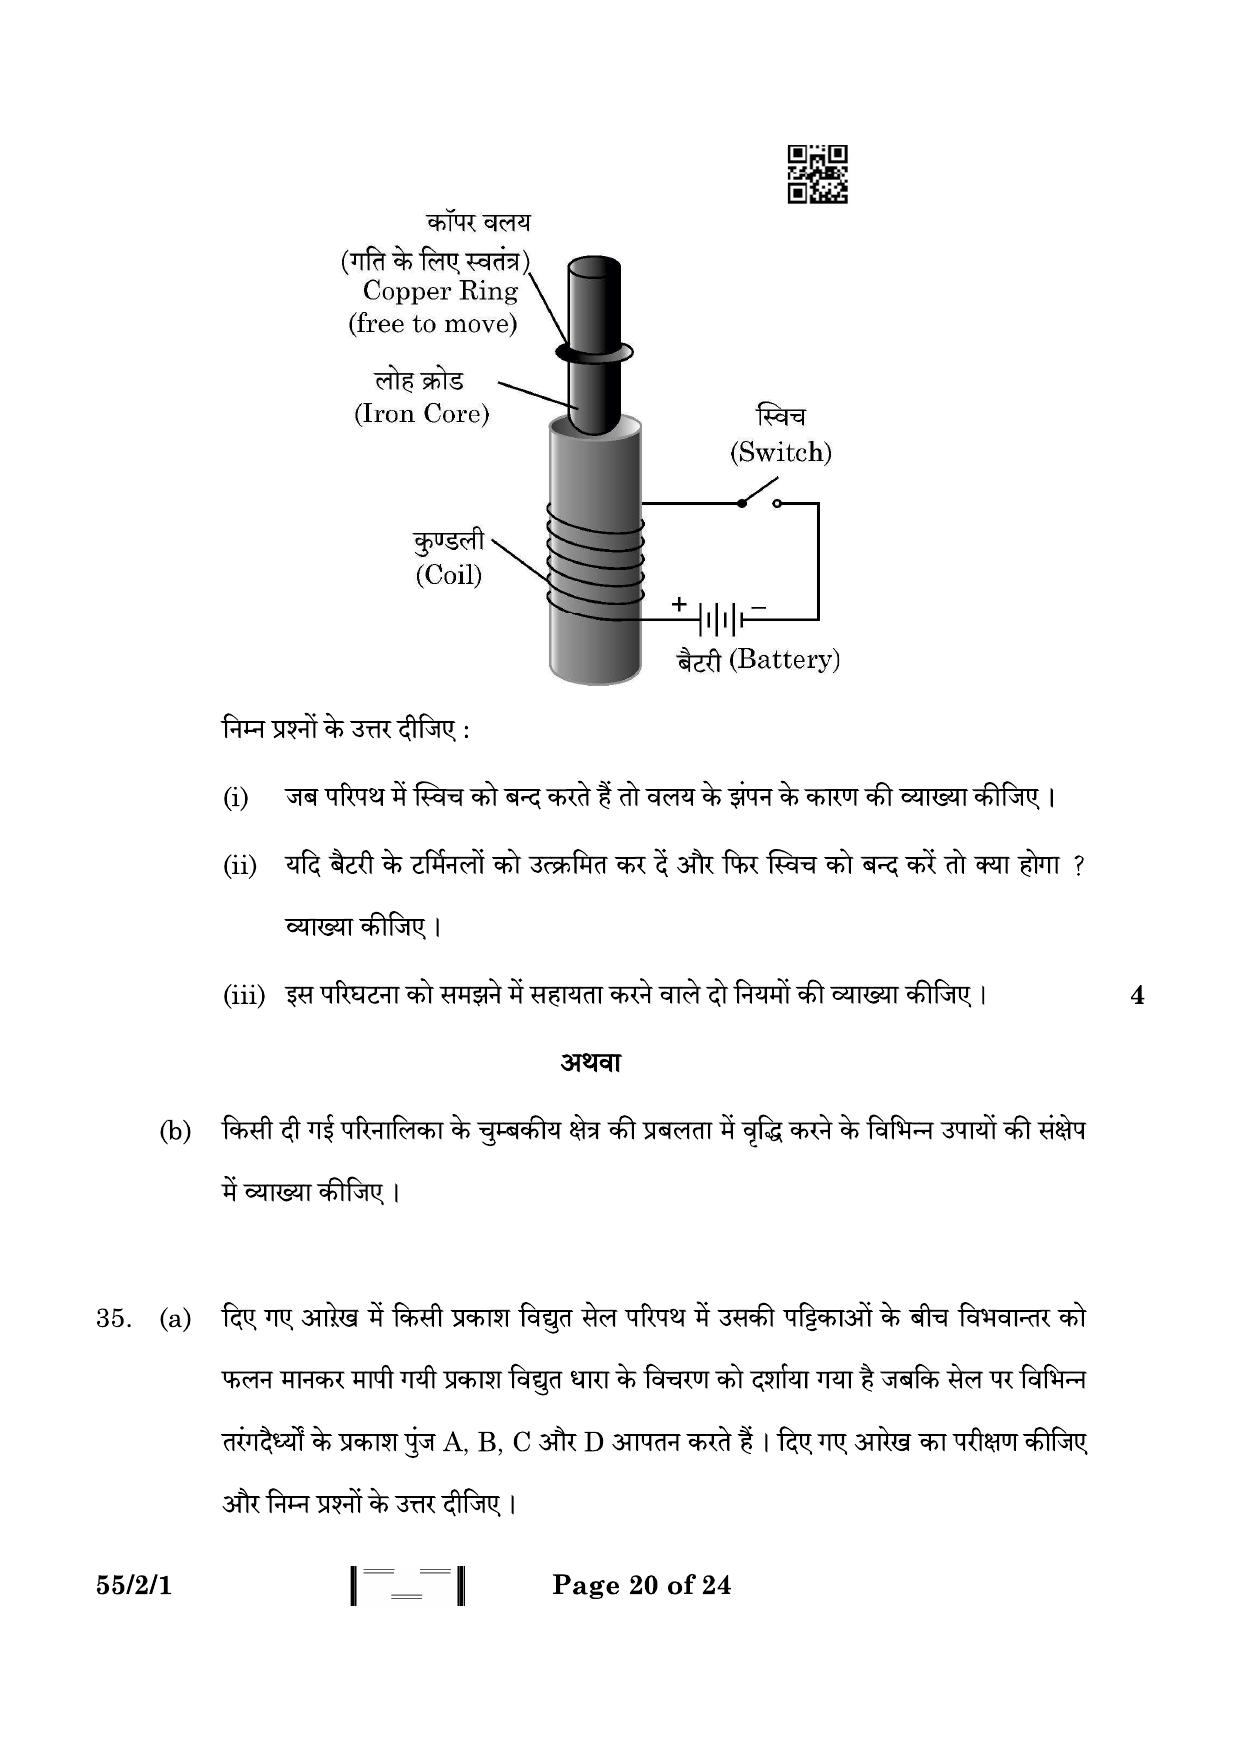 CBSE Class 12 55-2-1 Physics 2023 Question Paper - Page 20